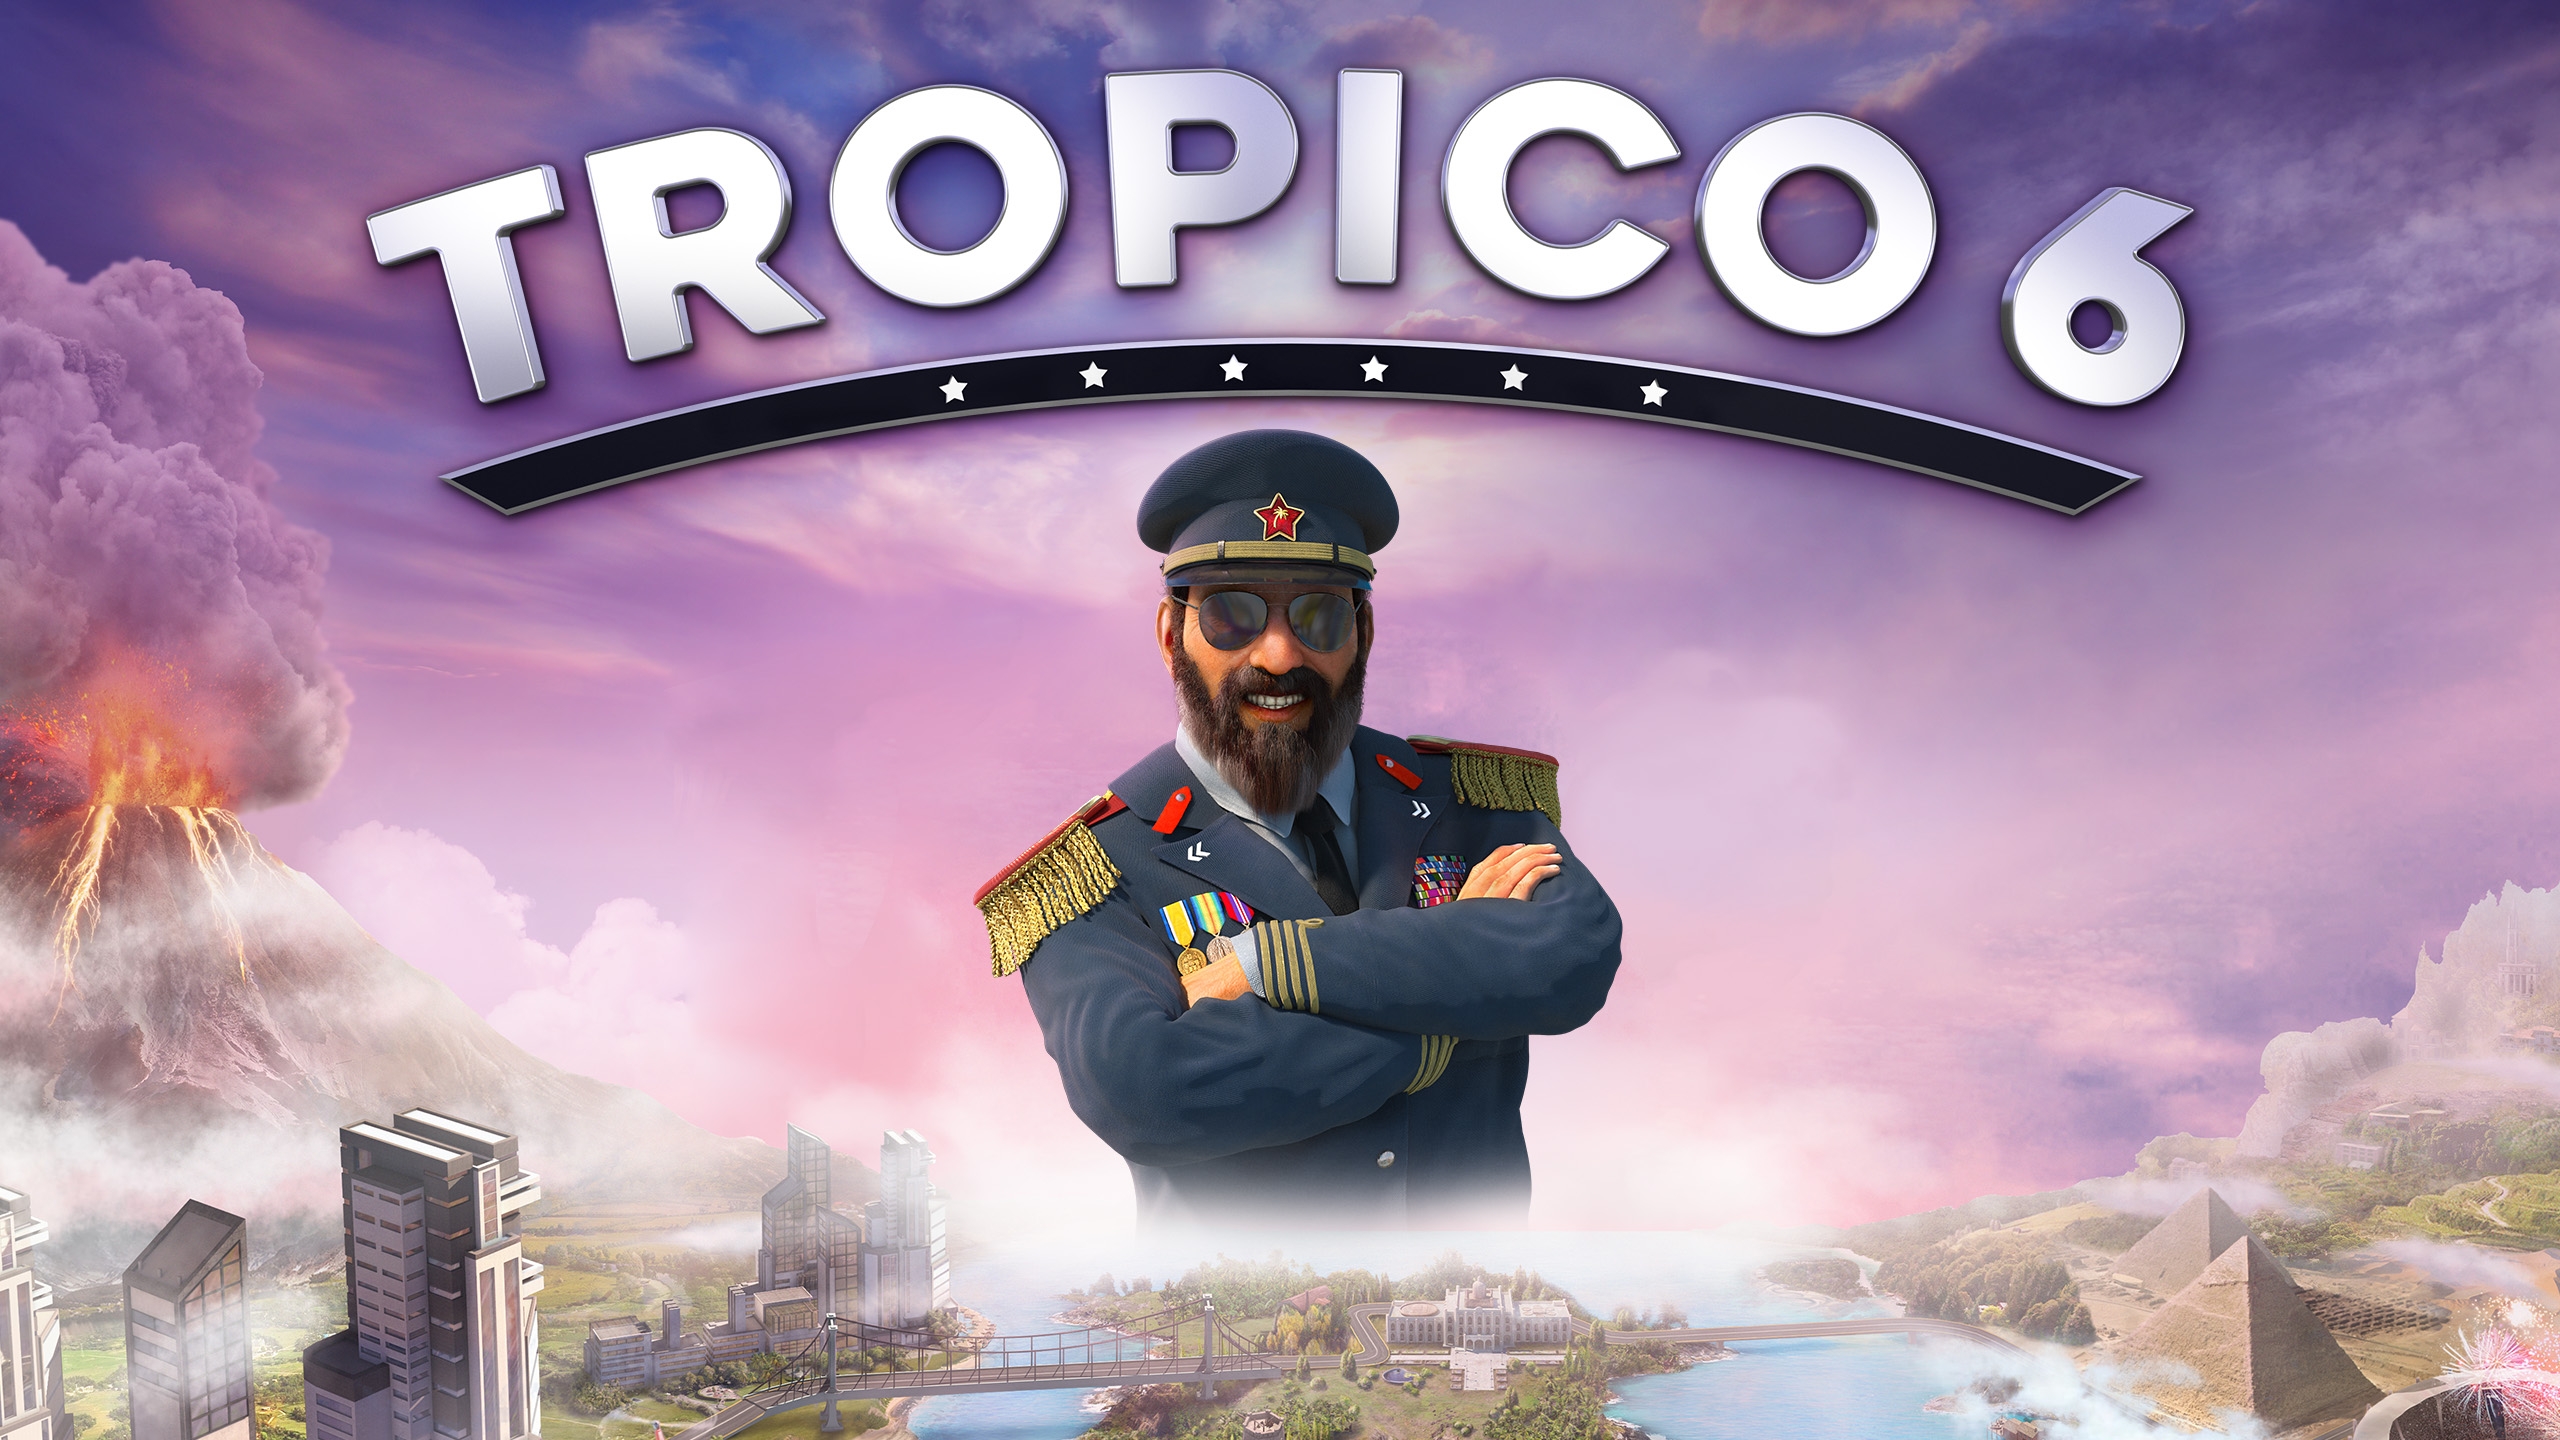 tropico 2 no opened ended